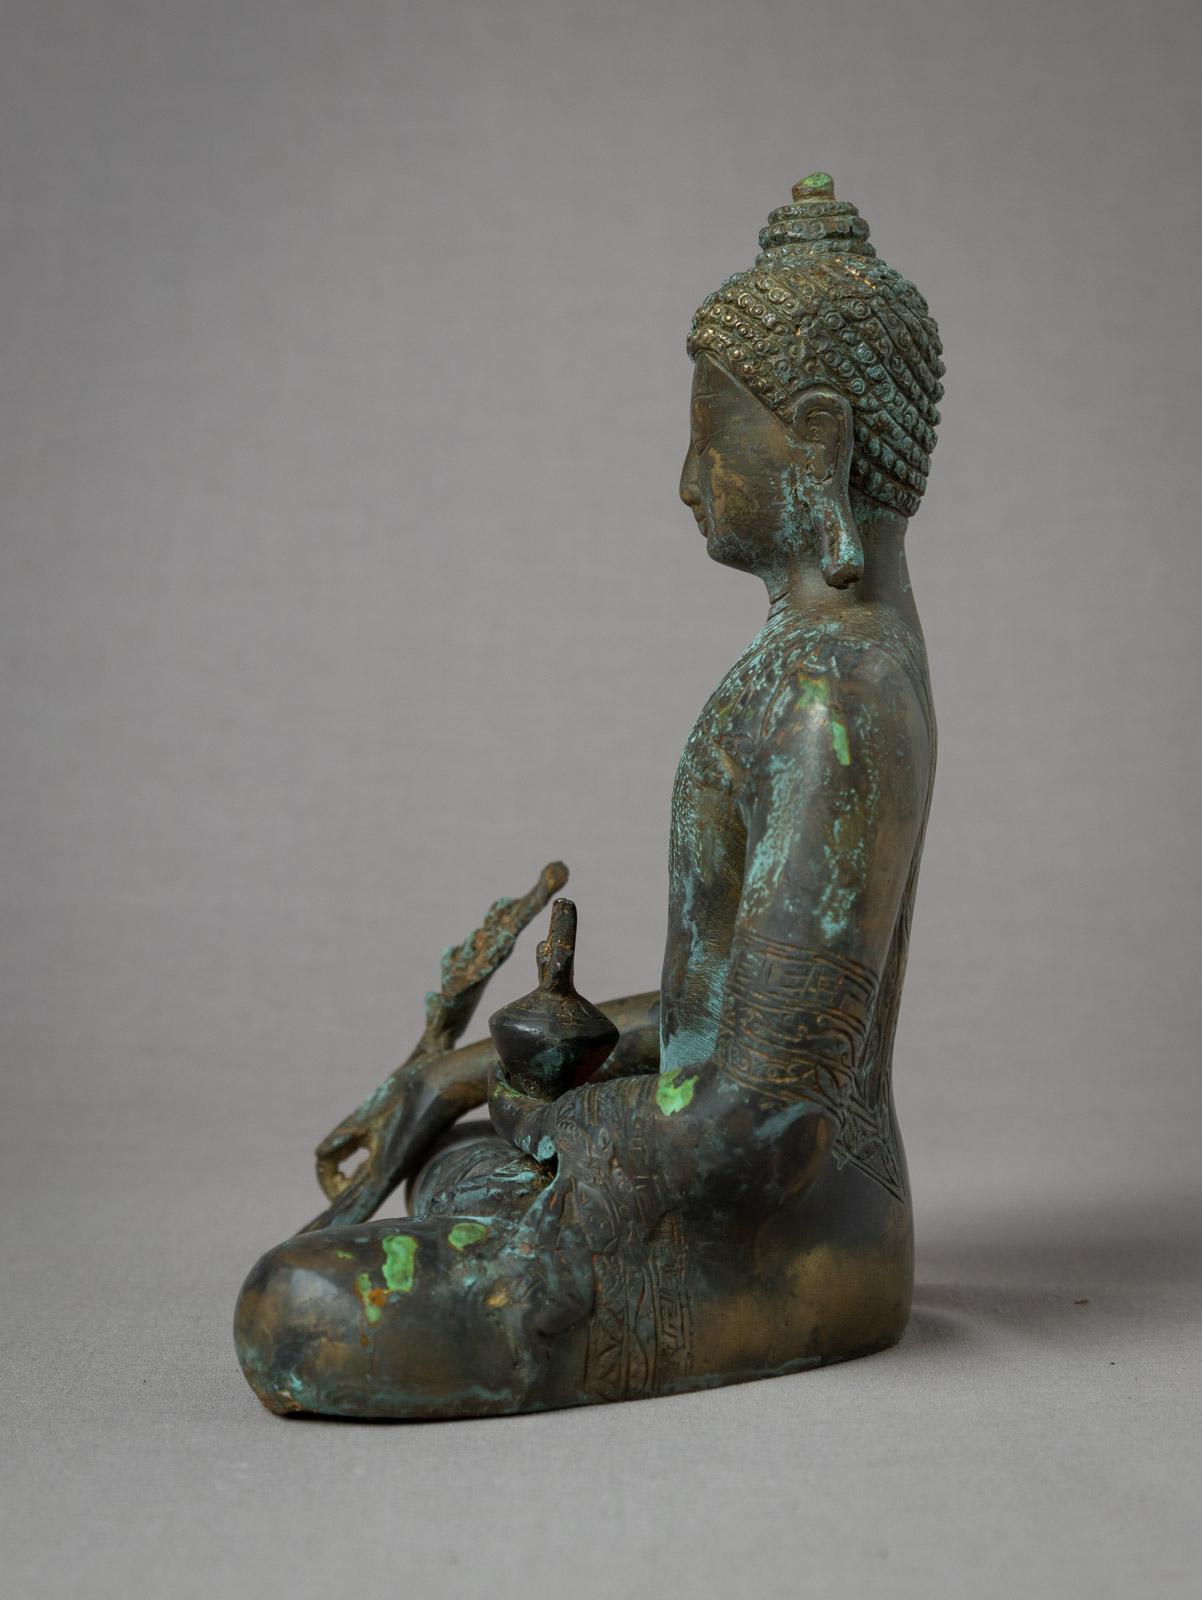 This Bronze Nepali Medicine Buddha is a true masterpiece of craftsmanship and spirituality. Standing at a majestic 21,8 cm in height, with dimensions of 16,8 cm in width and 13,3 cm in depth, it is a substantial representation of the Medicine